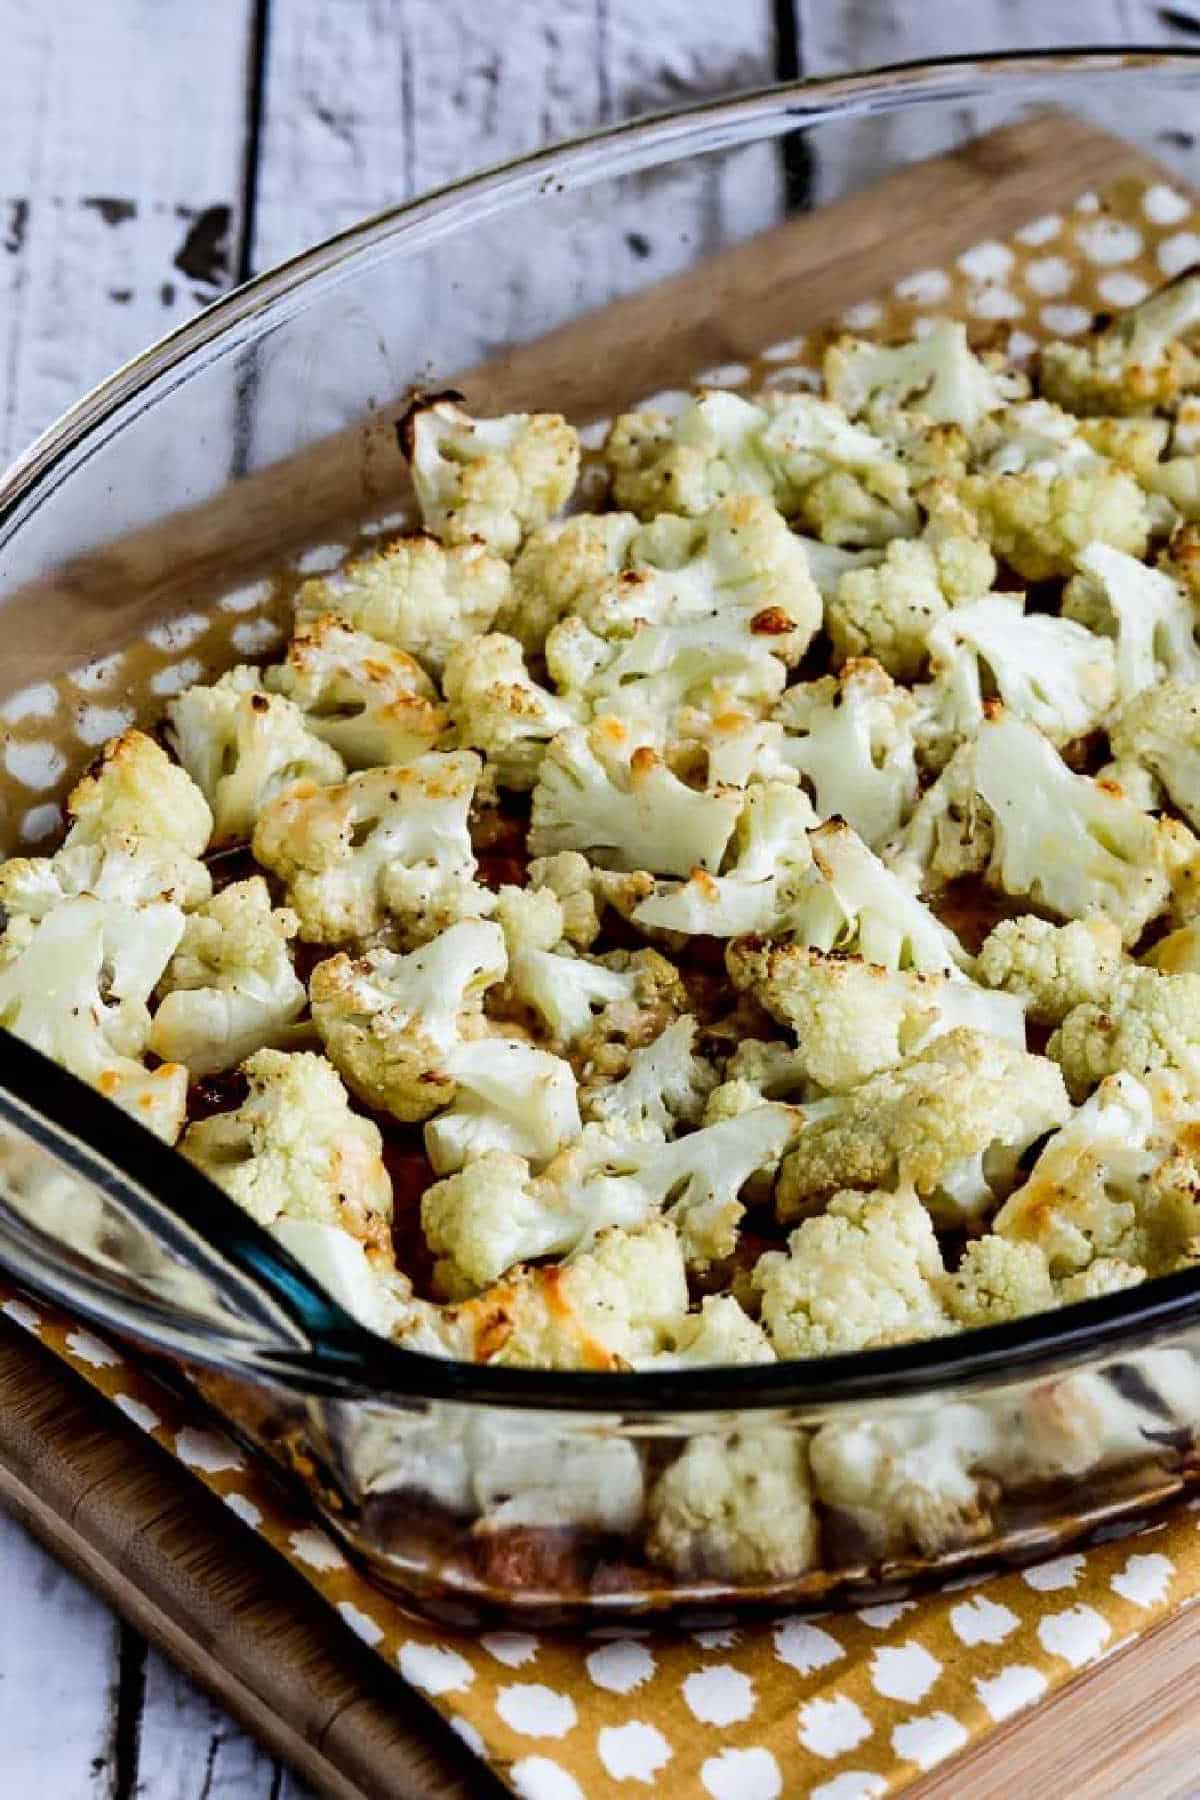 Roasted Cauliflower with Parmesan shown in baking dish